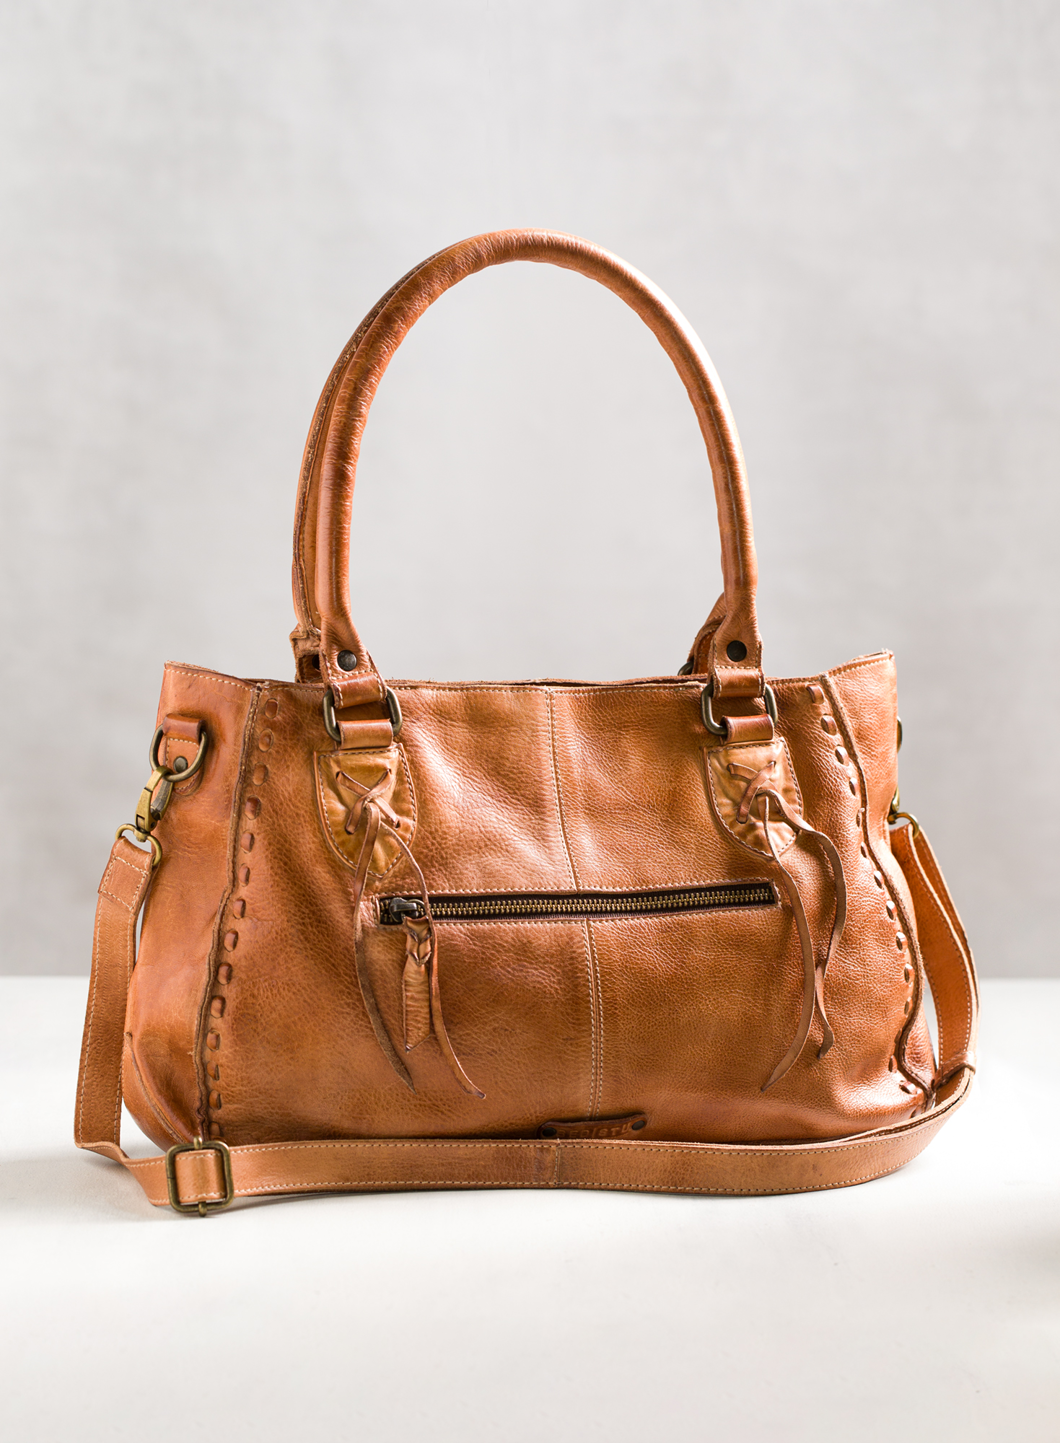 Peruvian Connection Small Distressed Satchel